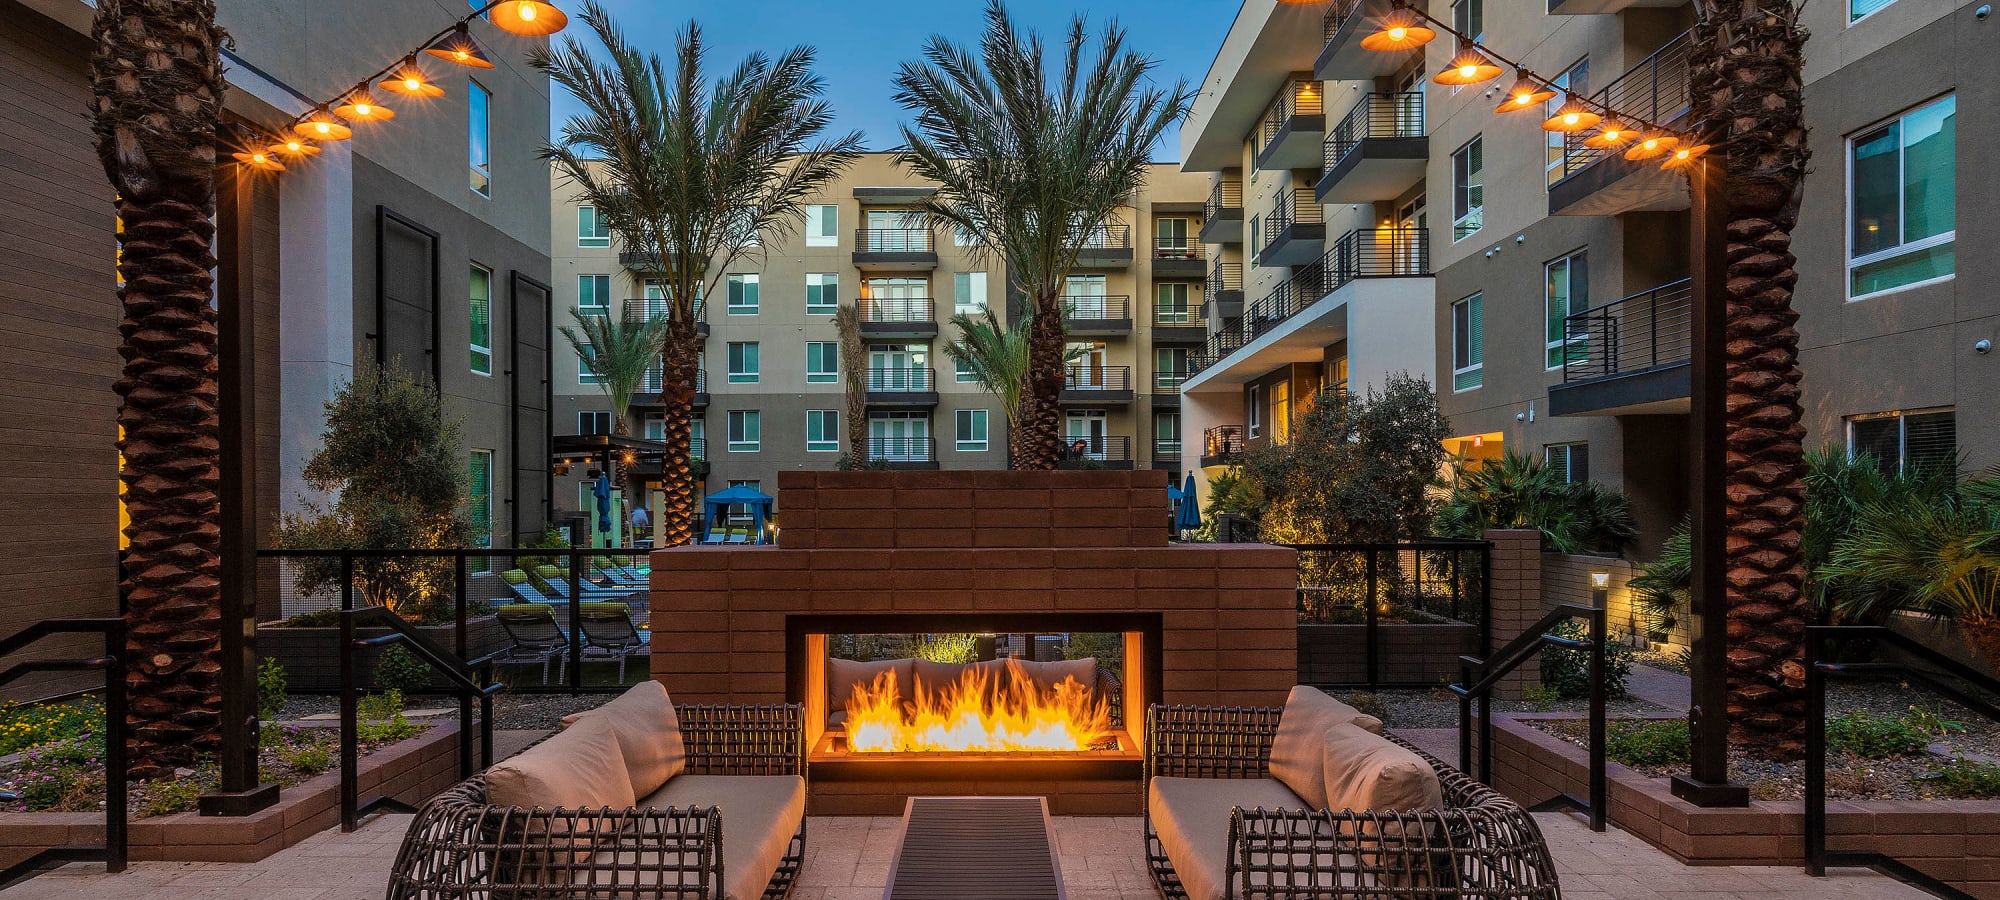 Fire pit in the evening at Carter in Scottsdale, Arizona